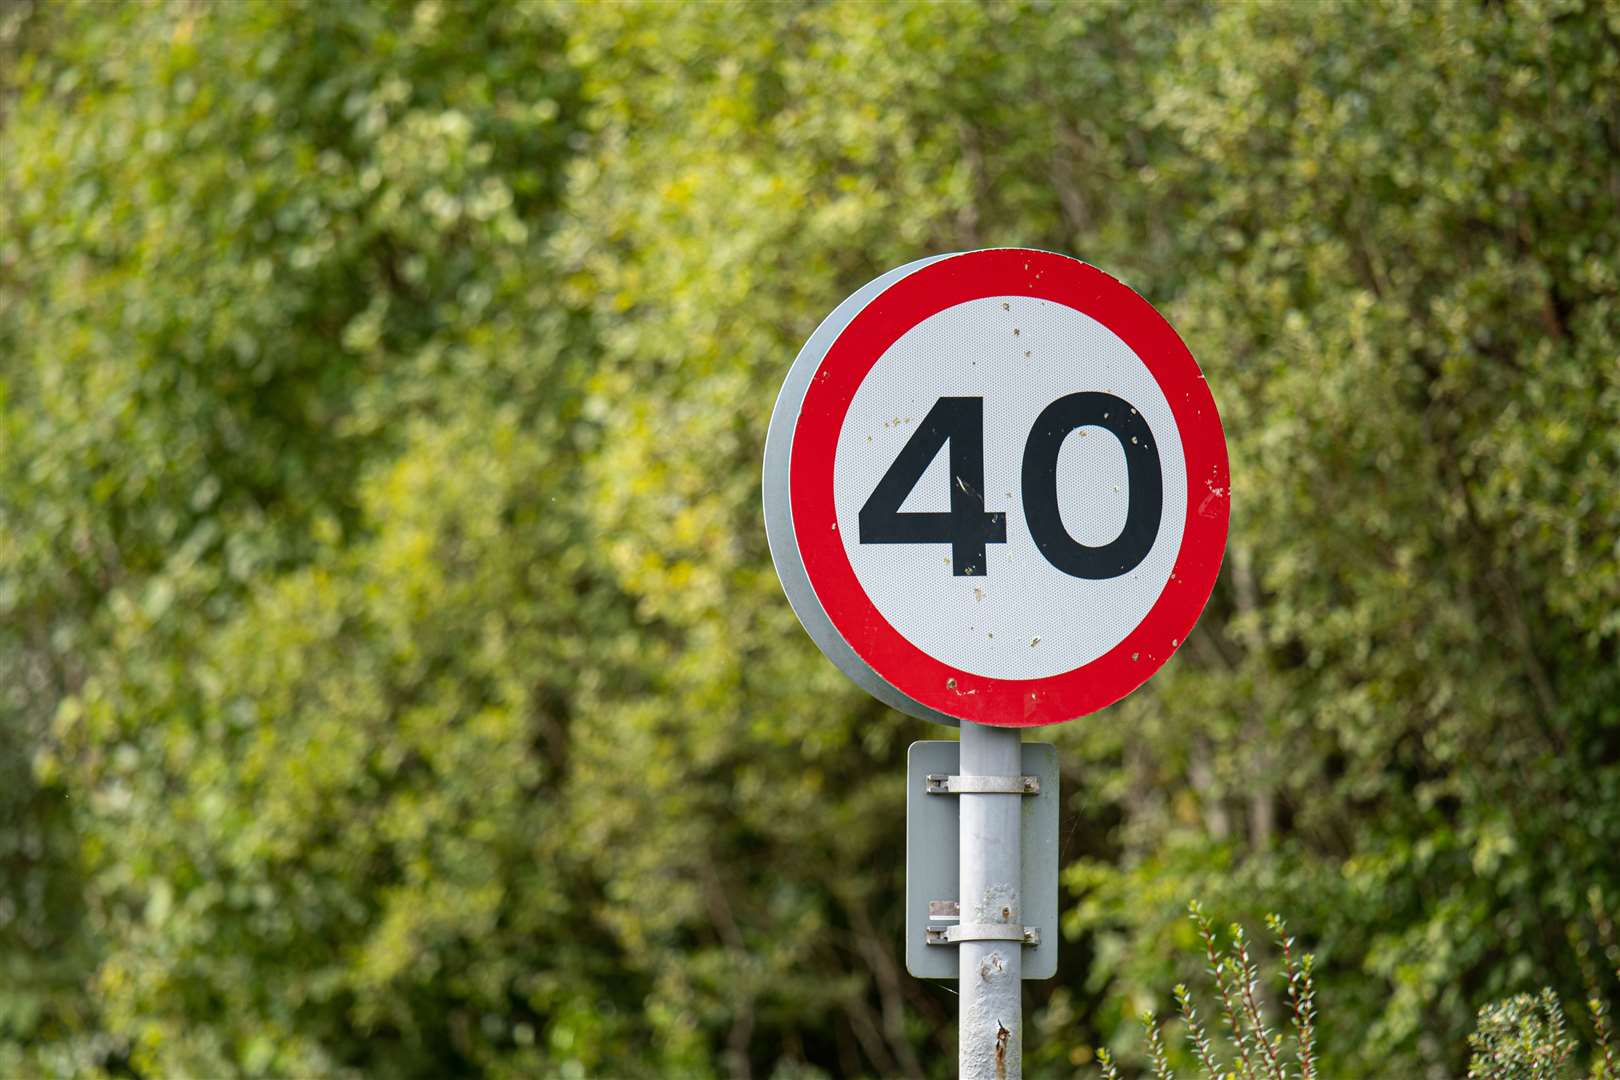 Local councillors are now suggesting a 40mph speed limit between Bonar Bridge and Ardgay.